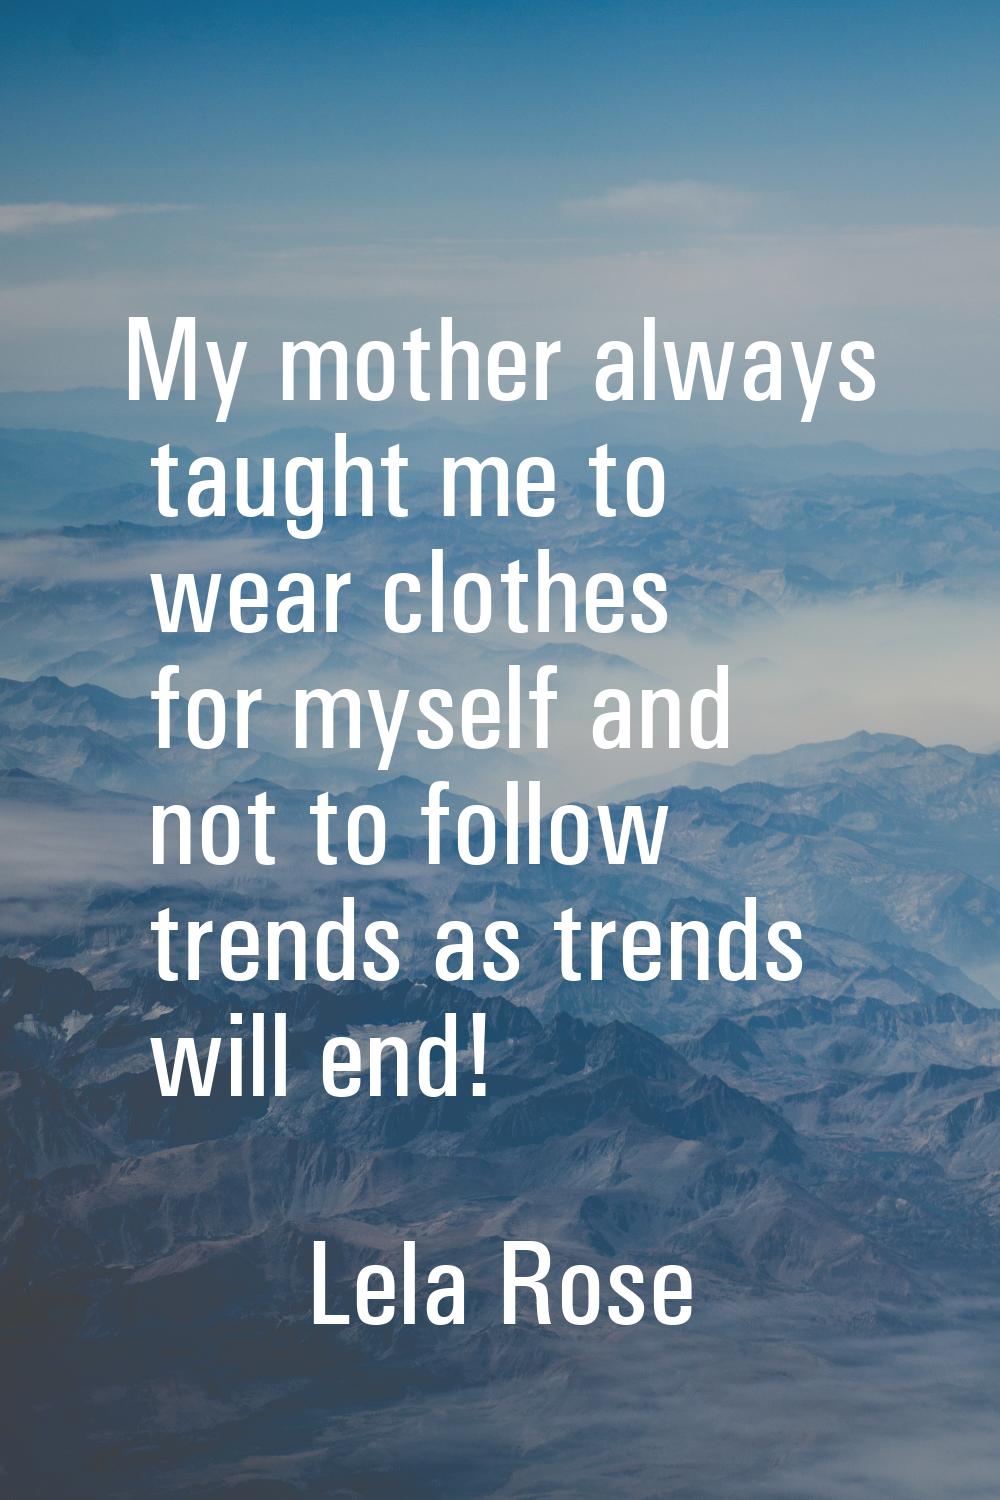 My mother always taught me to wear clothes for myself and not to follow trends as trends will end!